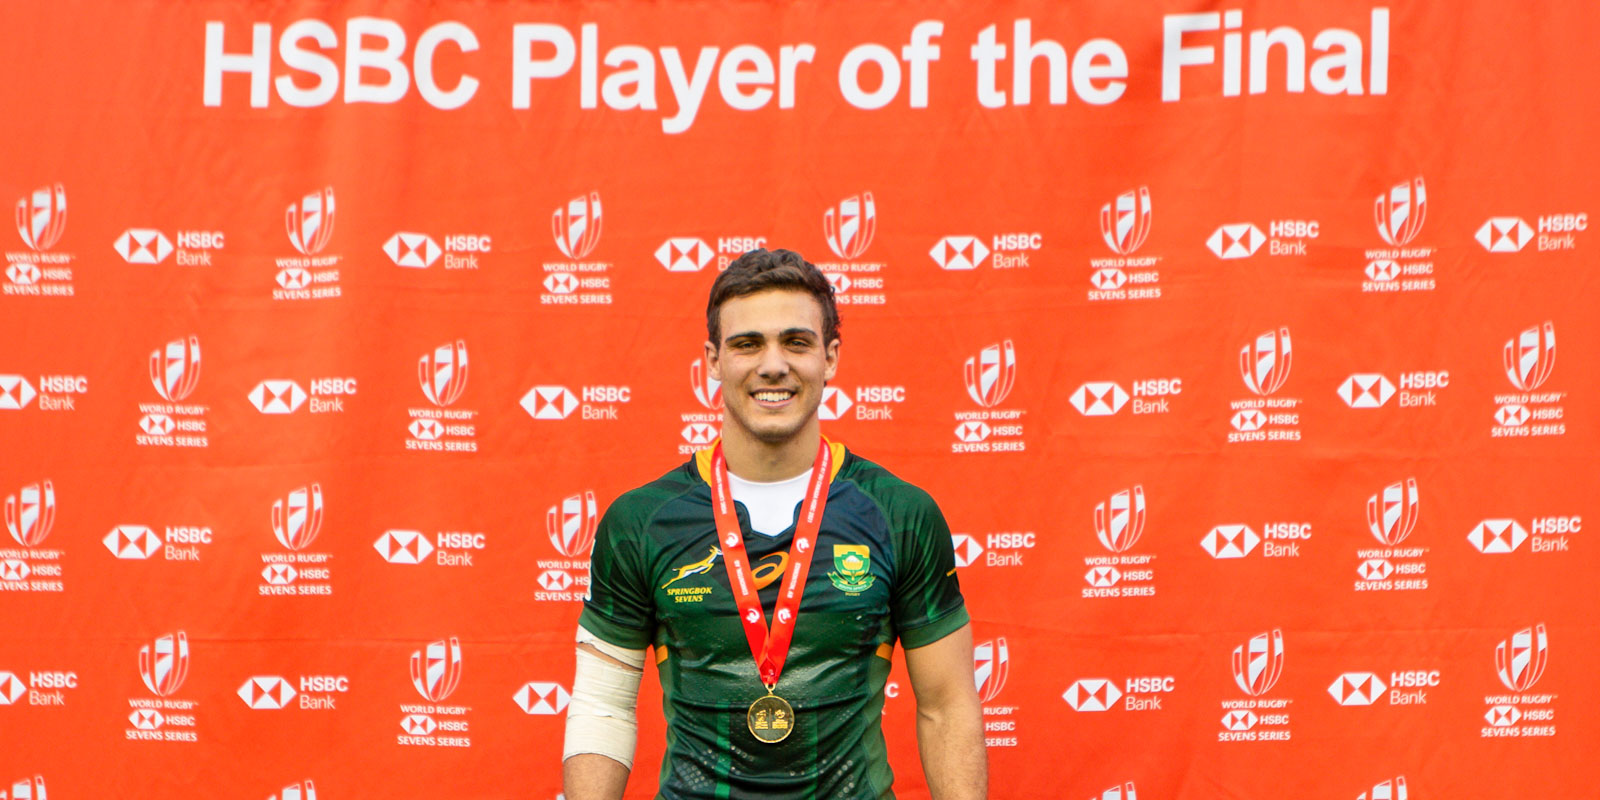 Muller du Plessis was the Player of the Final and the leading try-scorer in the World Series 2021.